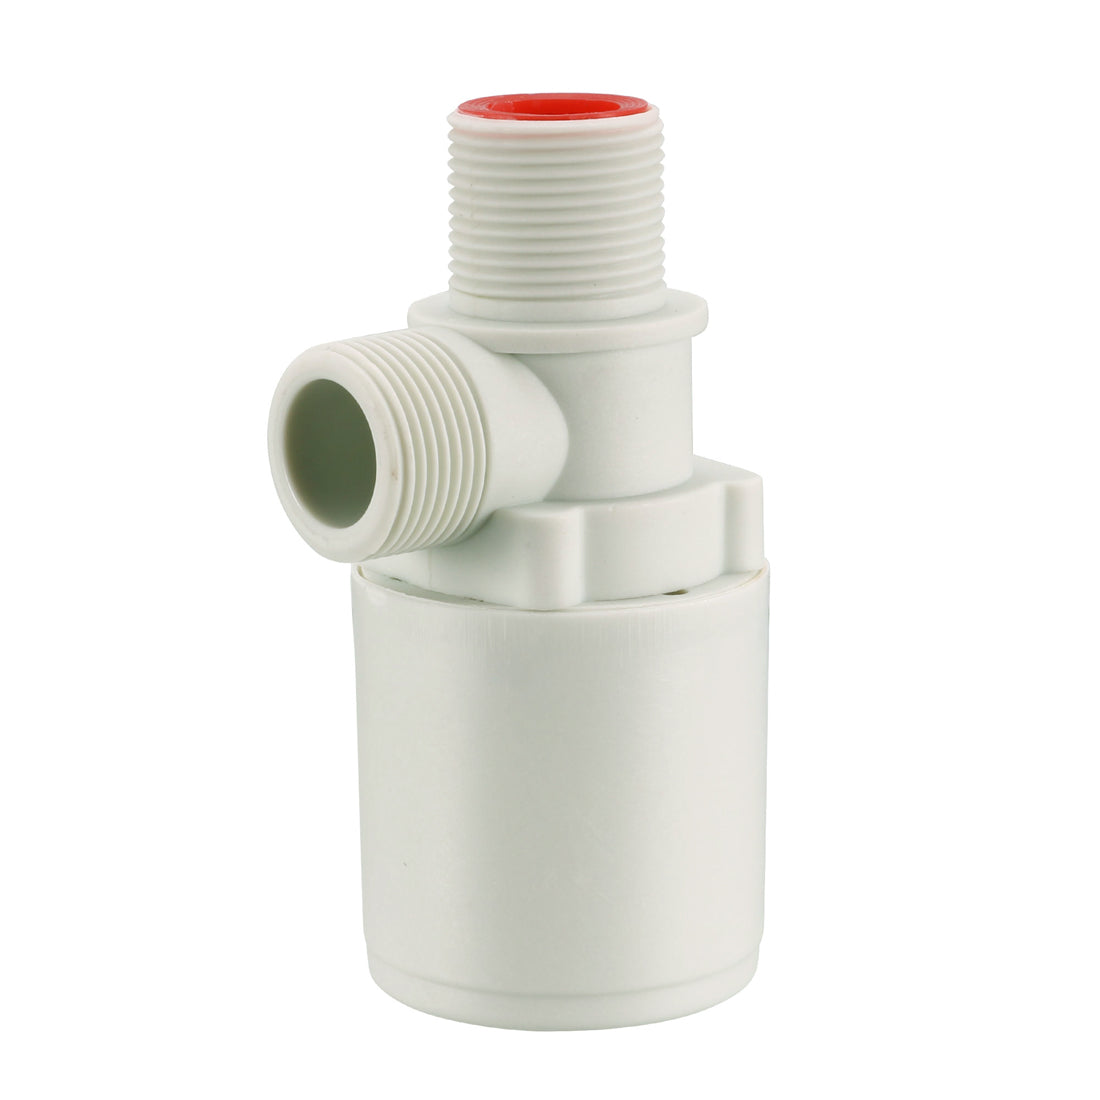 uxcell Uxcell Float Ball Valve G3/4 Thread Plastic Vertical Water Liquid Level Control Sensor Automatic with Filter